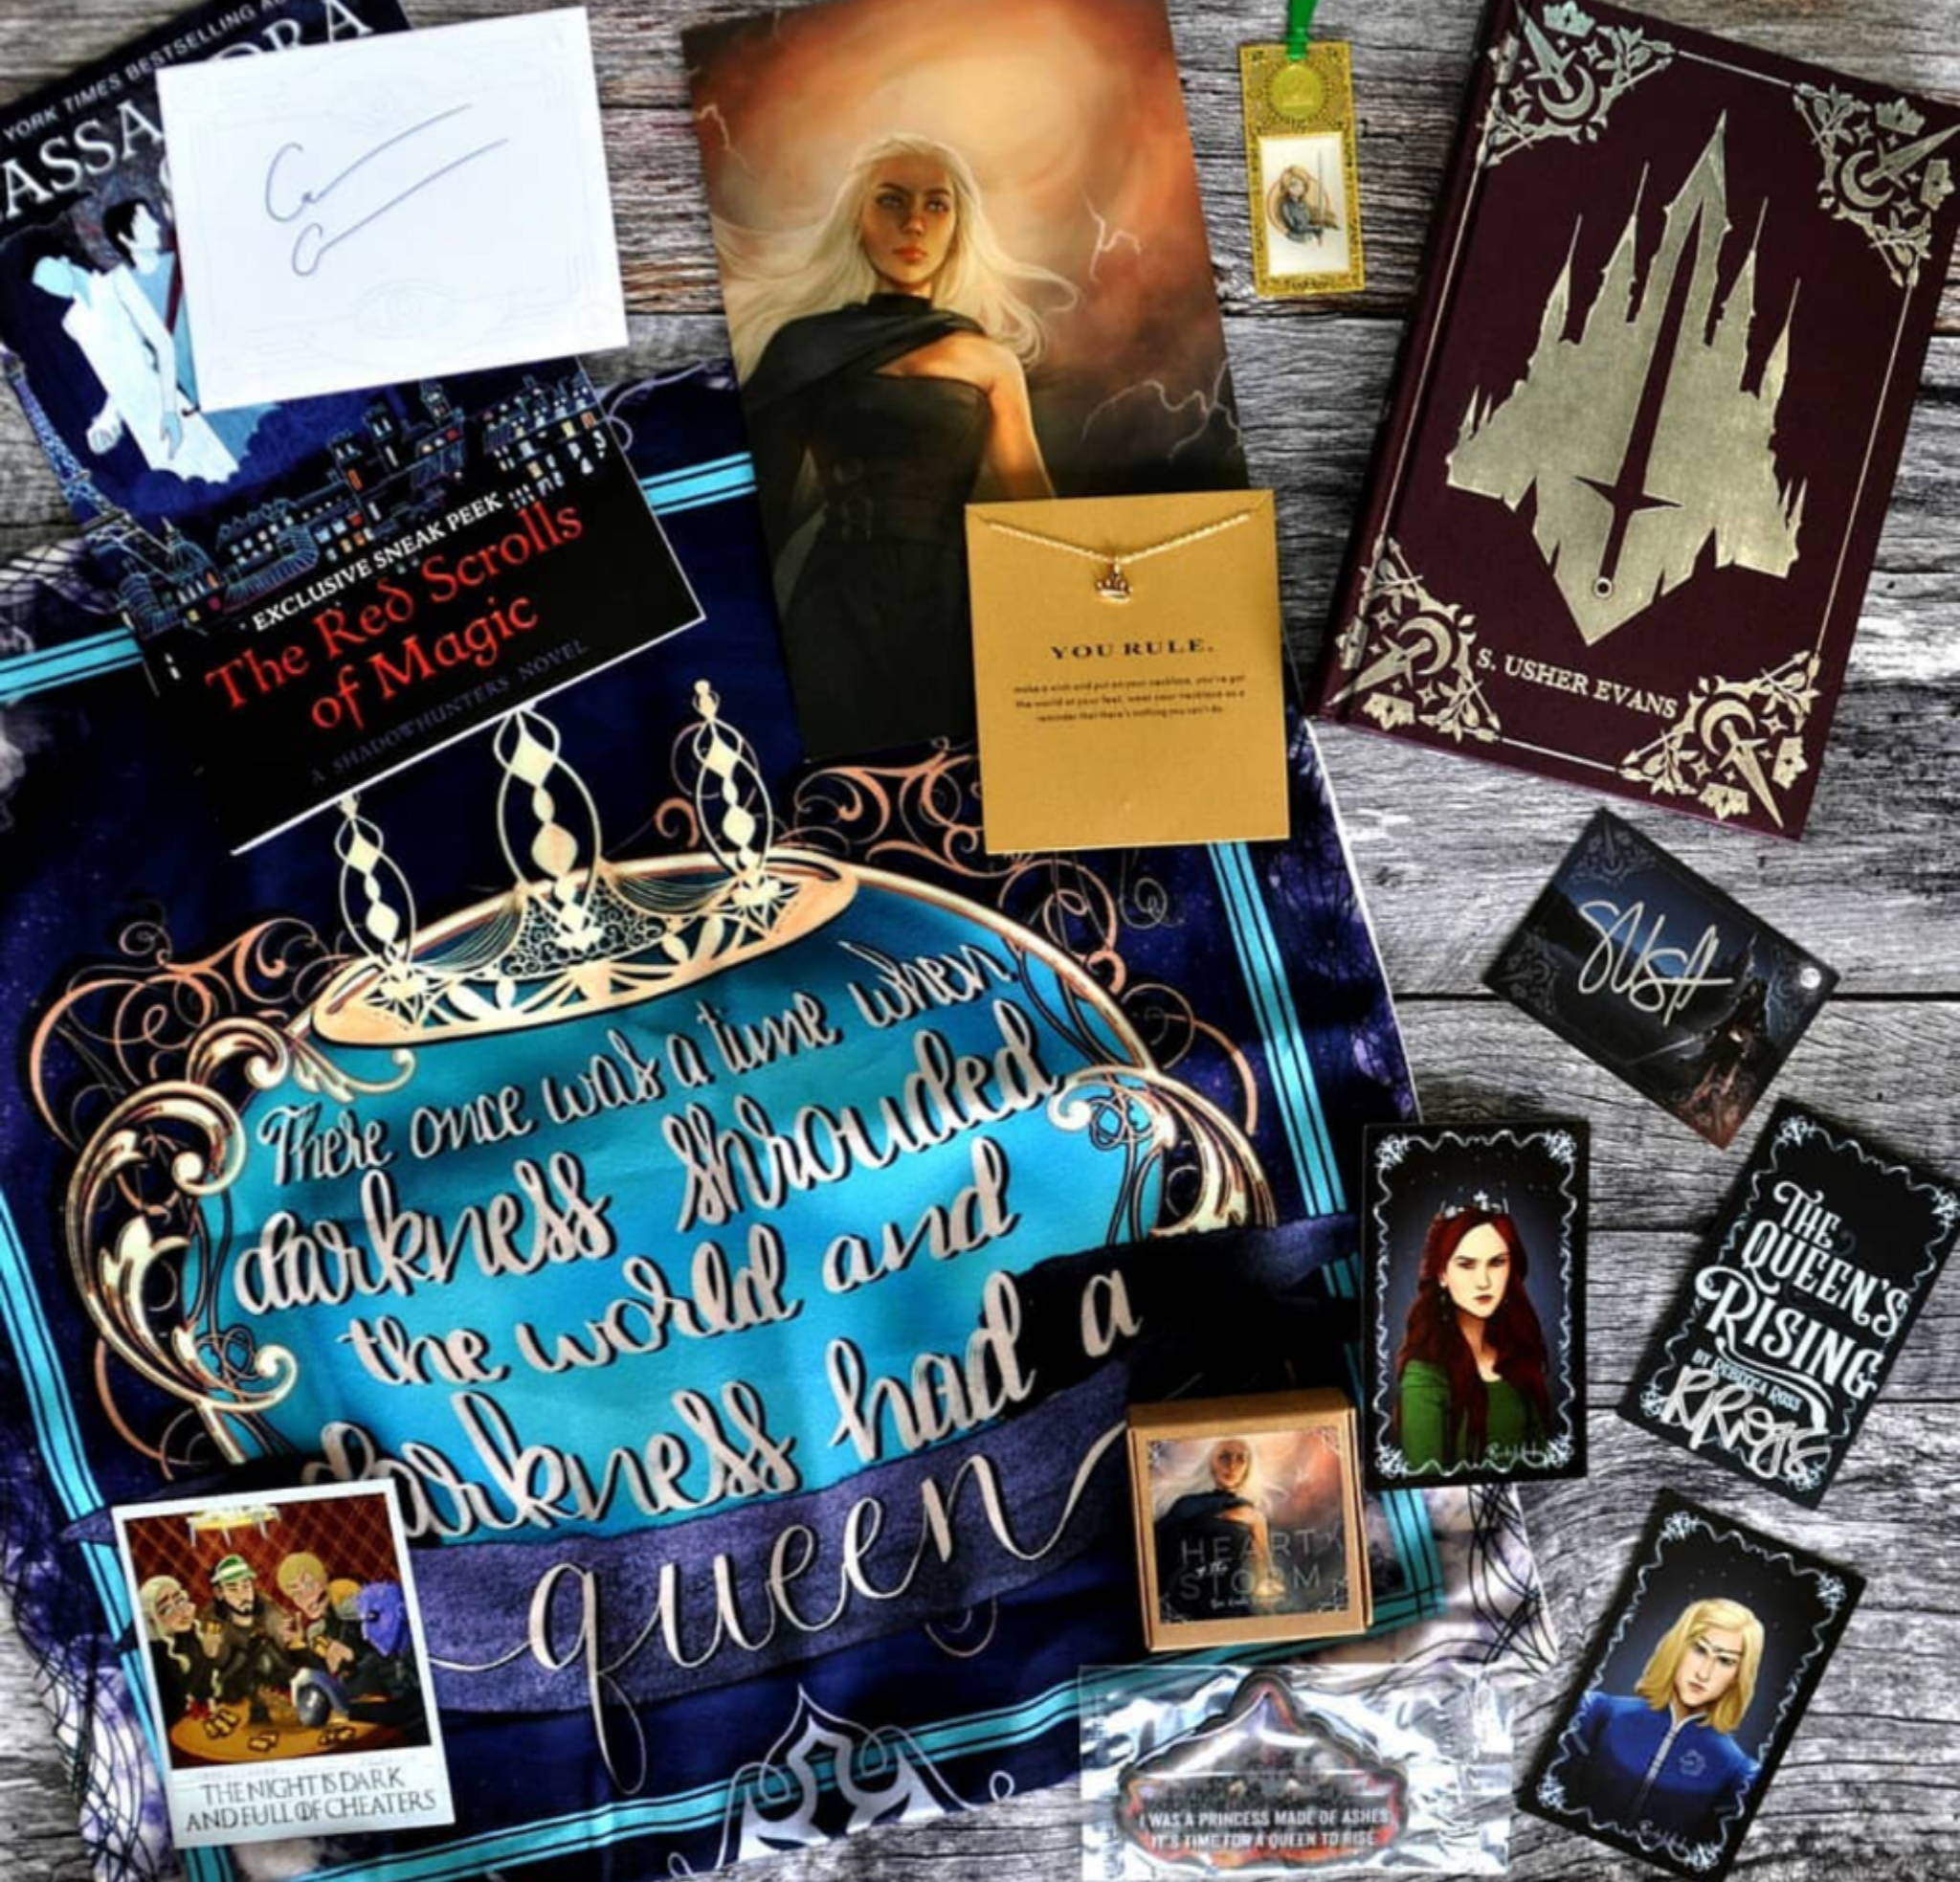 April 2019 Hold My Crown box theme included The Red Scrolls of Magic Sampler, Collector's Polaroid inspired by Game of Thrones, Queen's Rising/Resistance Character Cards, Ash Princess Air Freshener, ROAR inspired Soap, Metal Bookmark, Crown Necklace, Young Elites inspired Pillowcase, City of Veils by S. Usher Evans, and Three Dark Crowns Shirt for Seelie and Solitary Fae boxes only. 